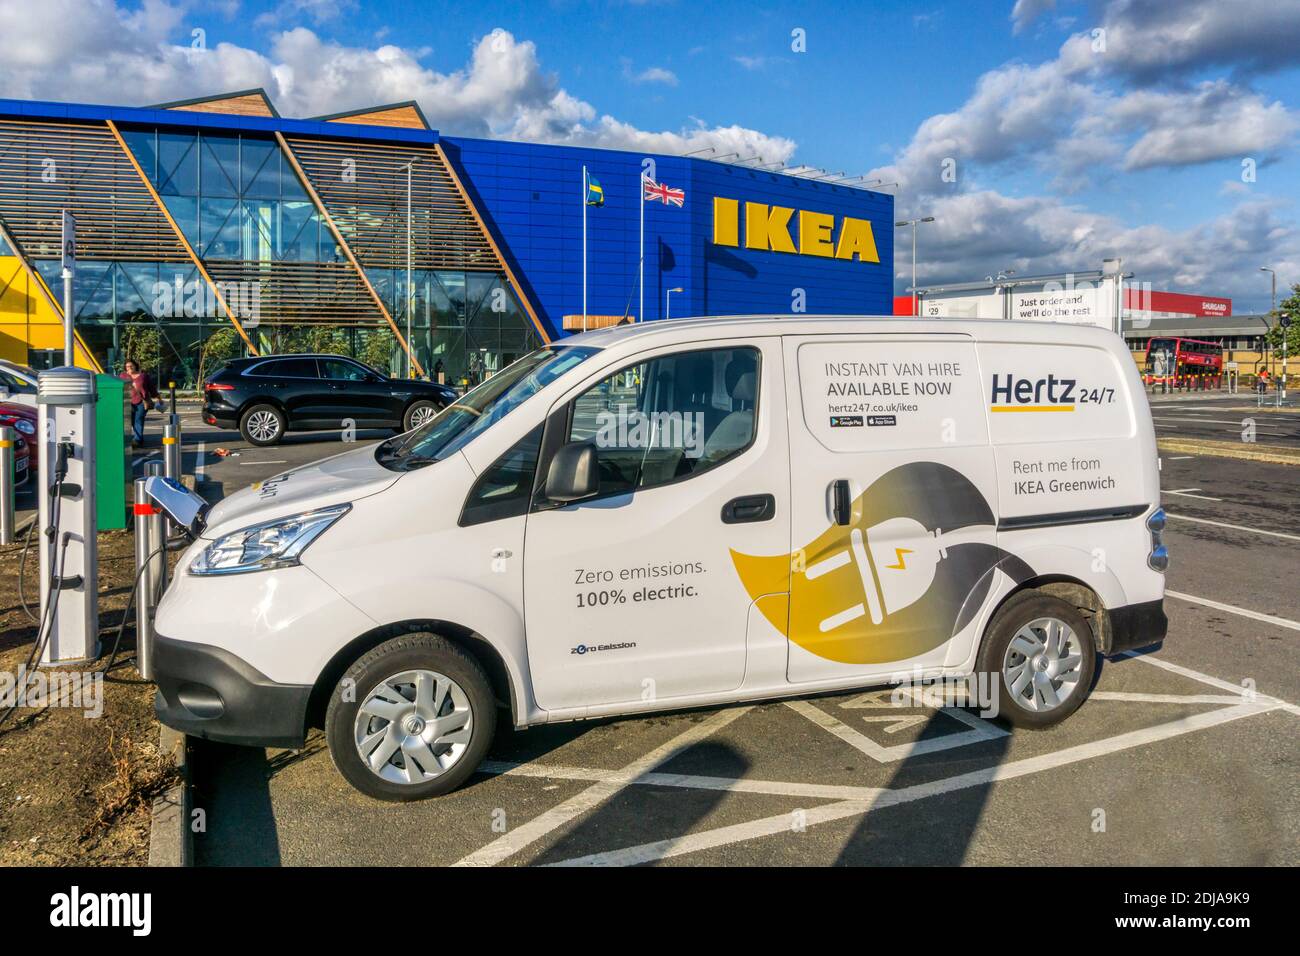 A Hertz electric van, available for rent from IKEA, charging at an Ecotricity charging point outside the large IKEA store on the Greenwich Peninsula. Stock Photo